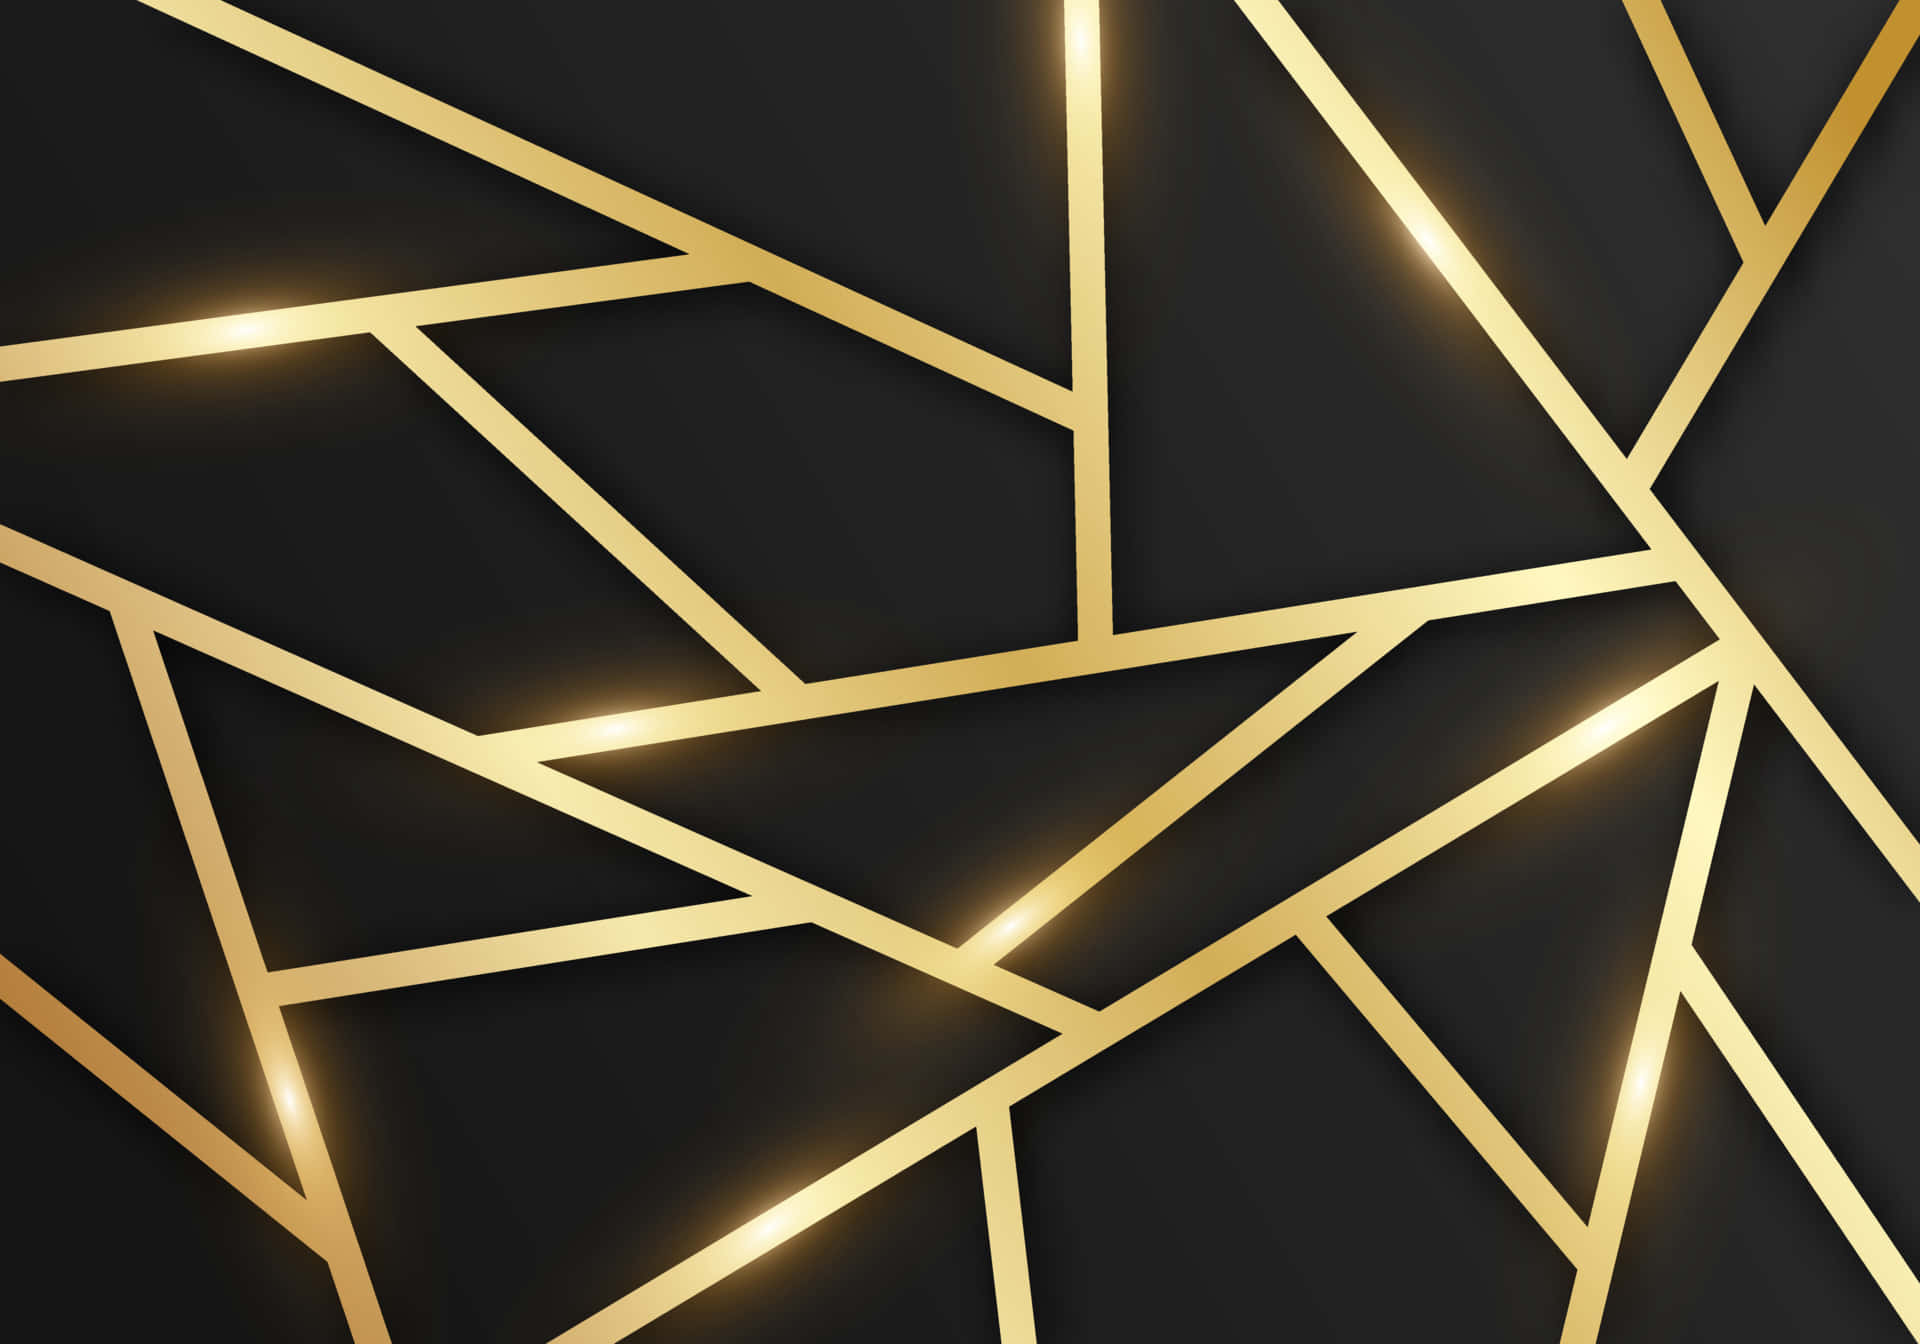 Dark Polygon Shapes Gold And Black Background